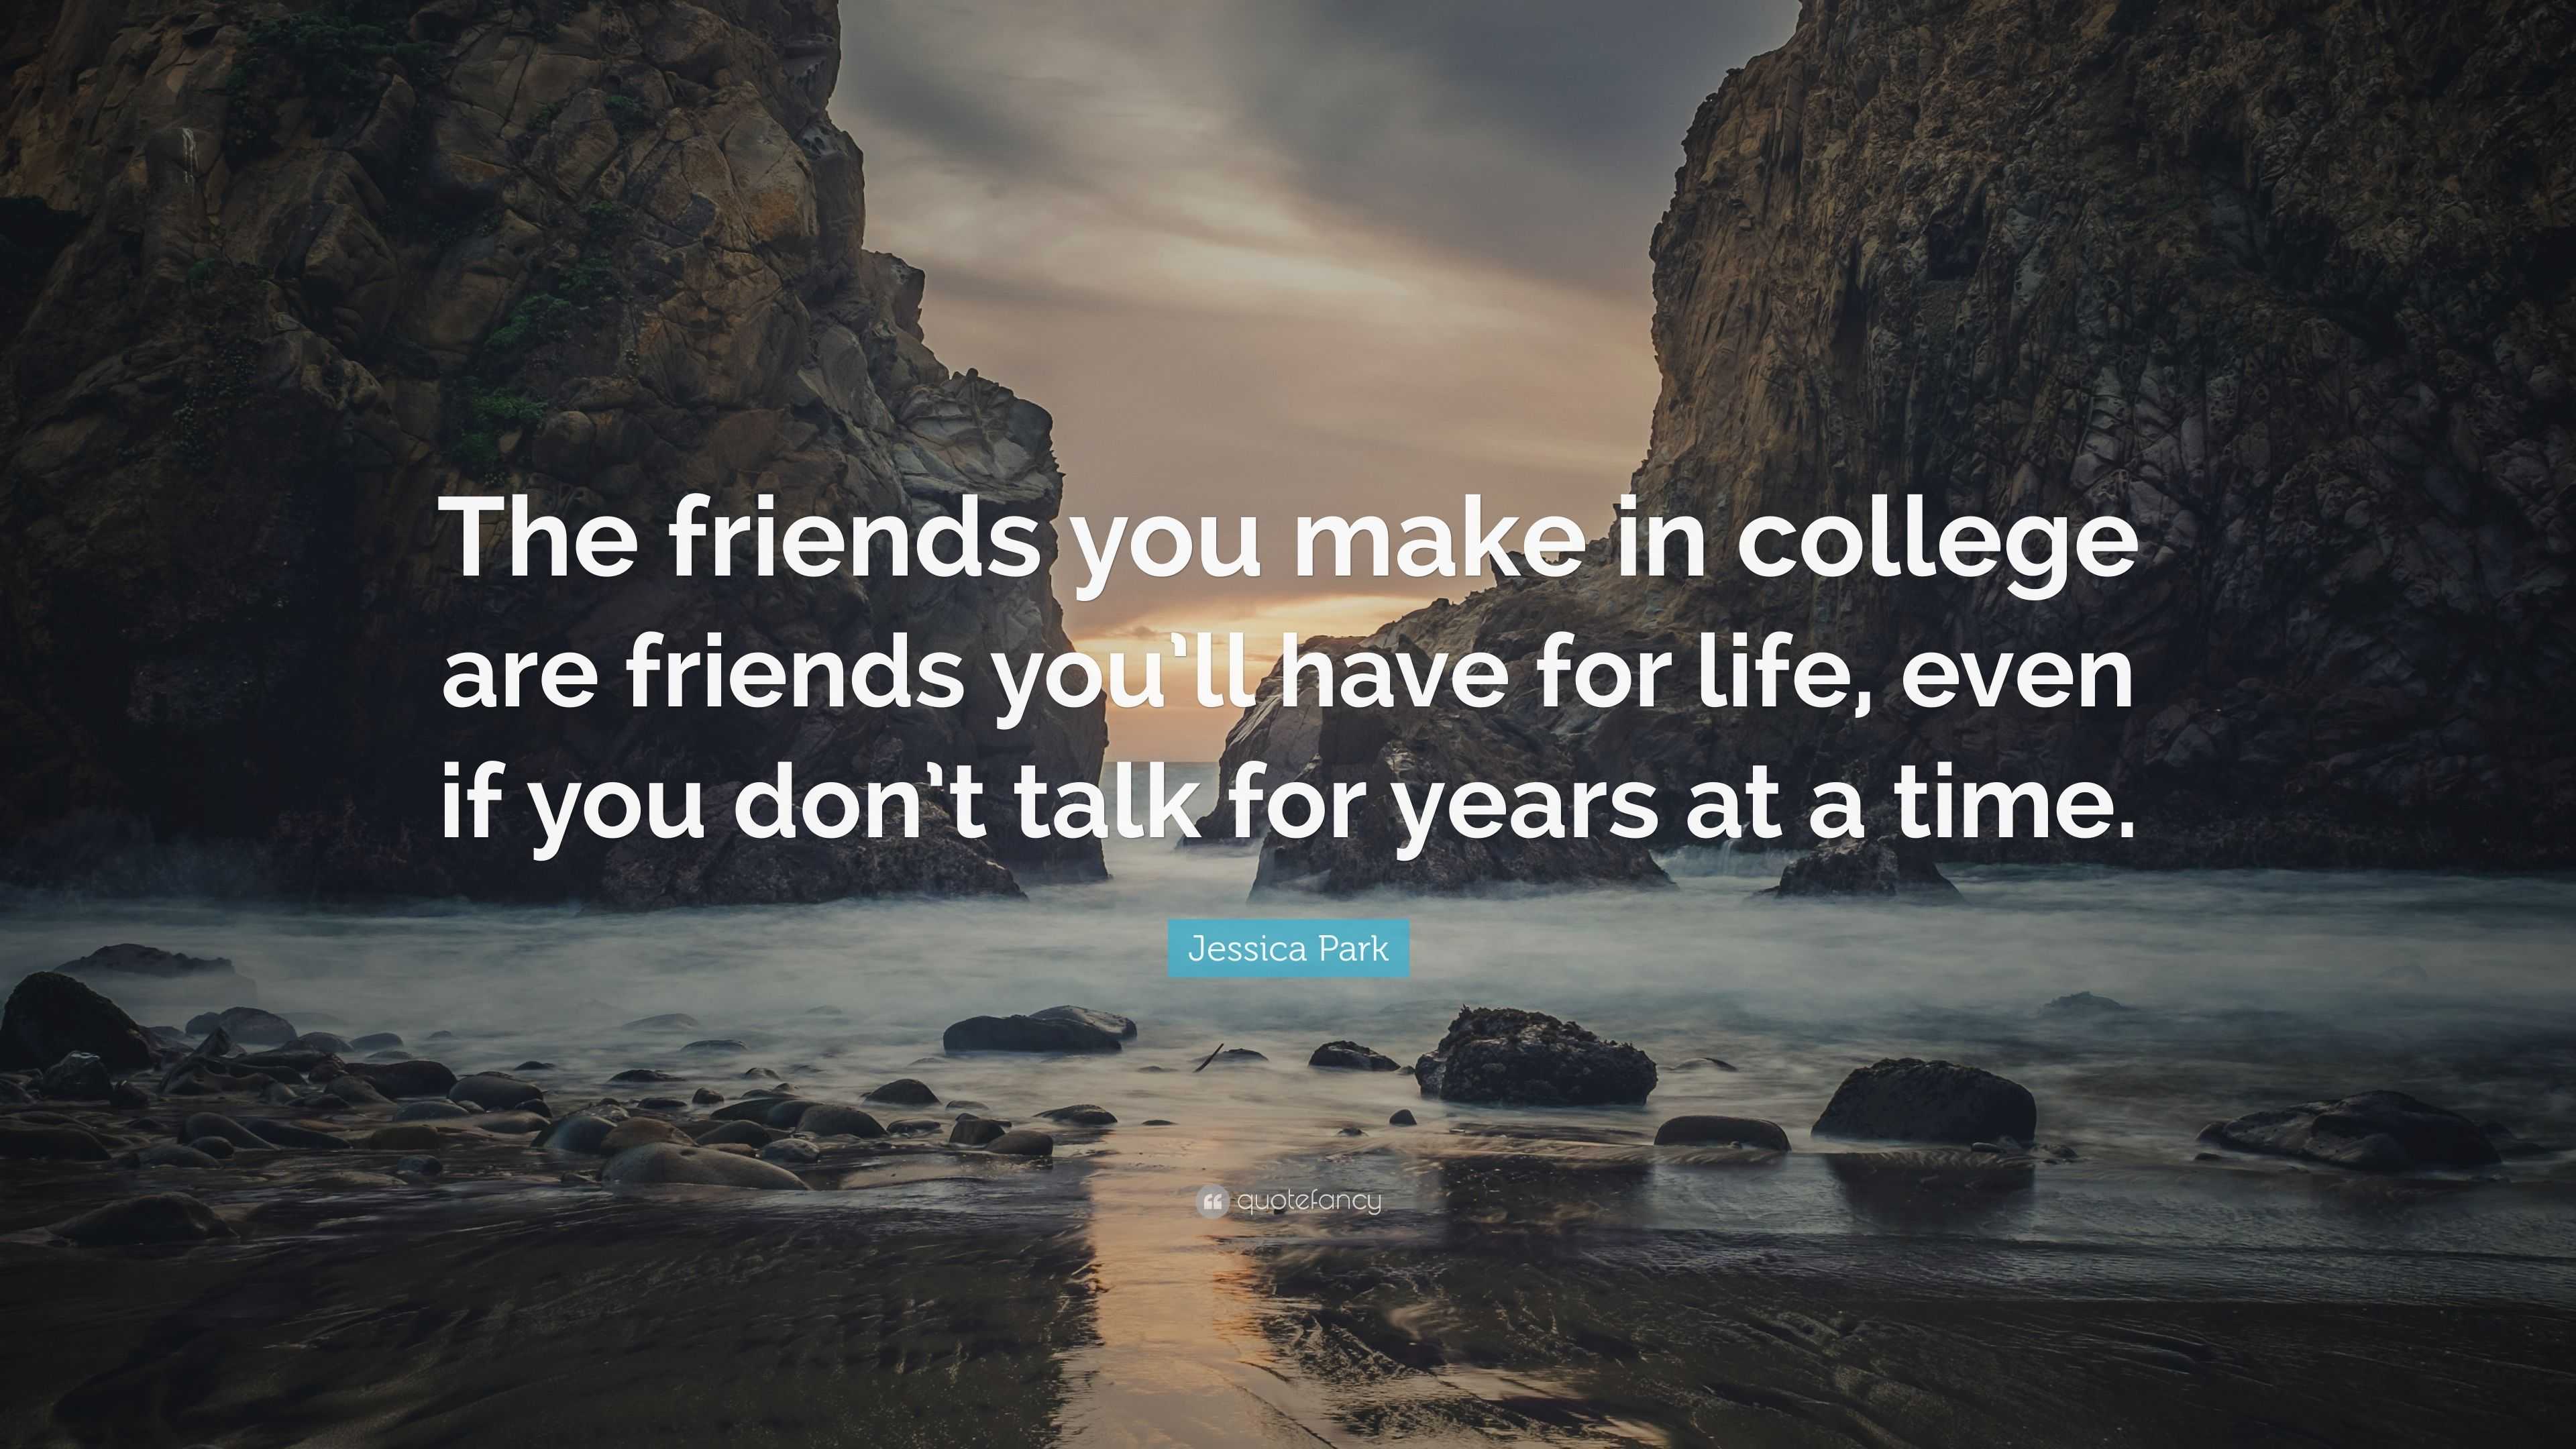 Quotes on college friends